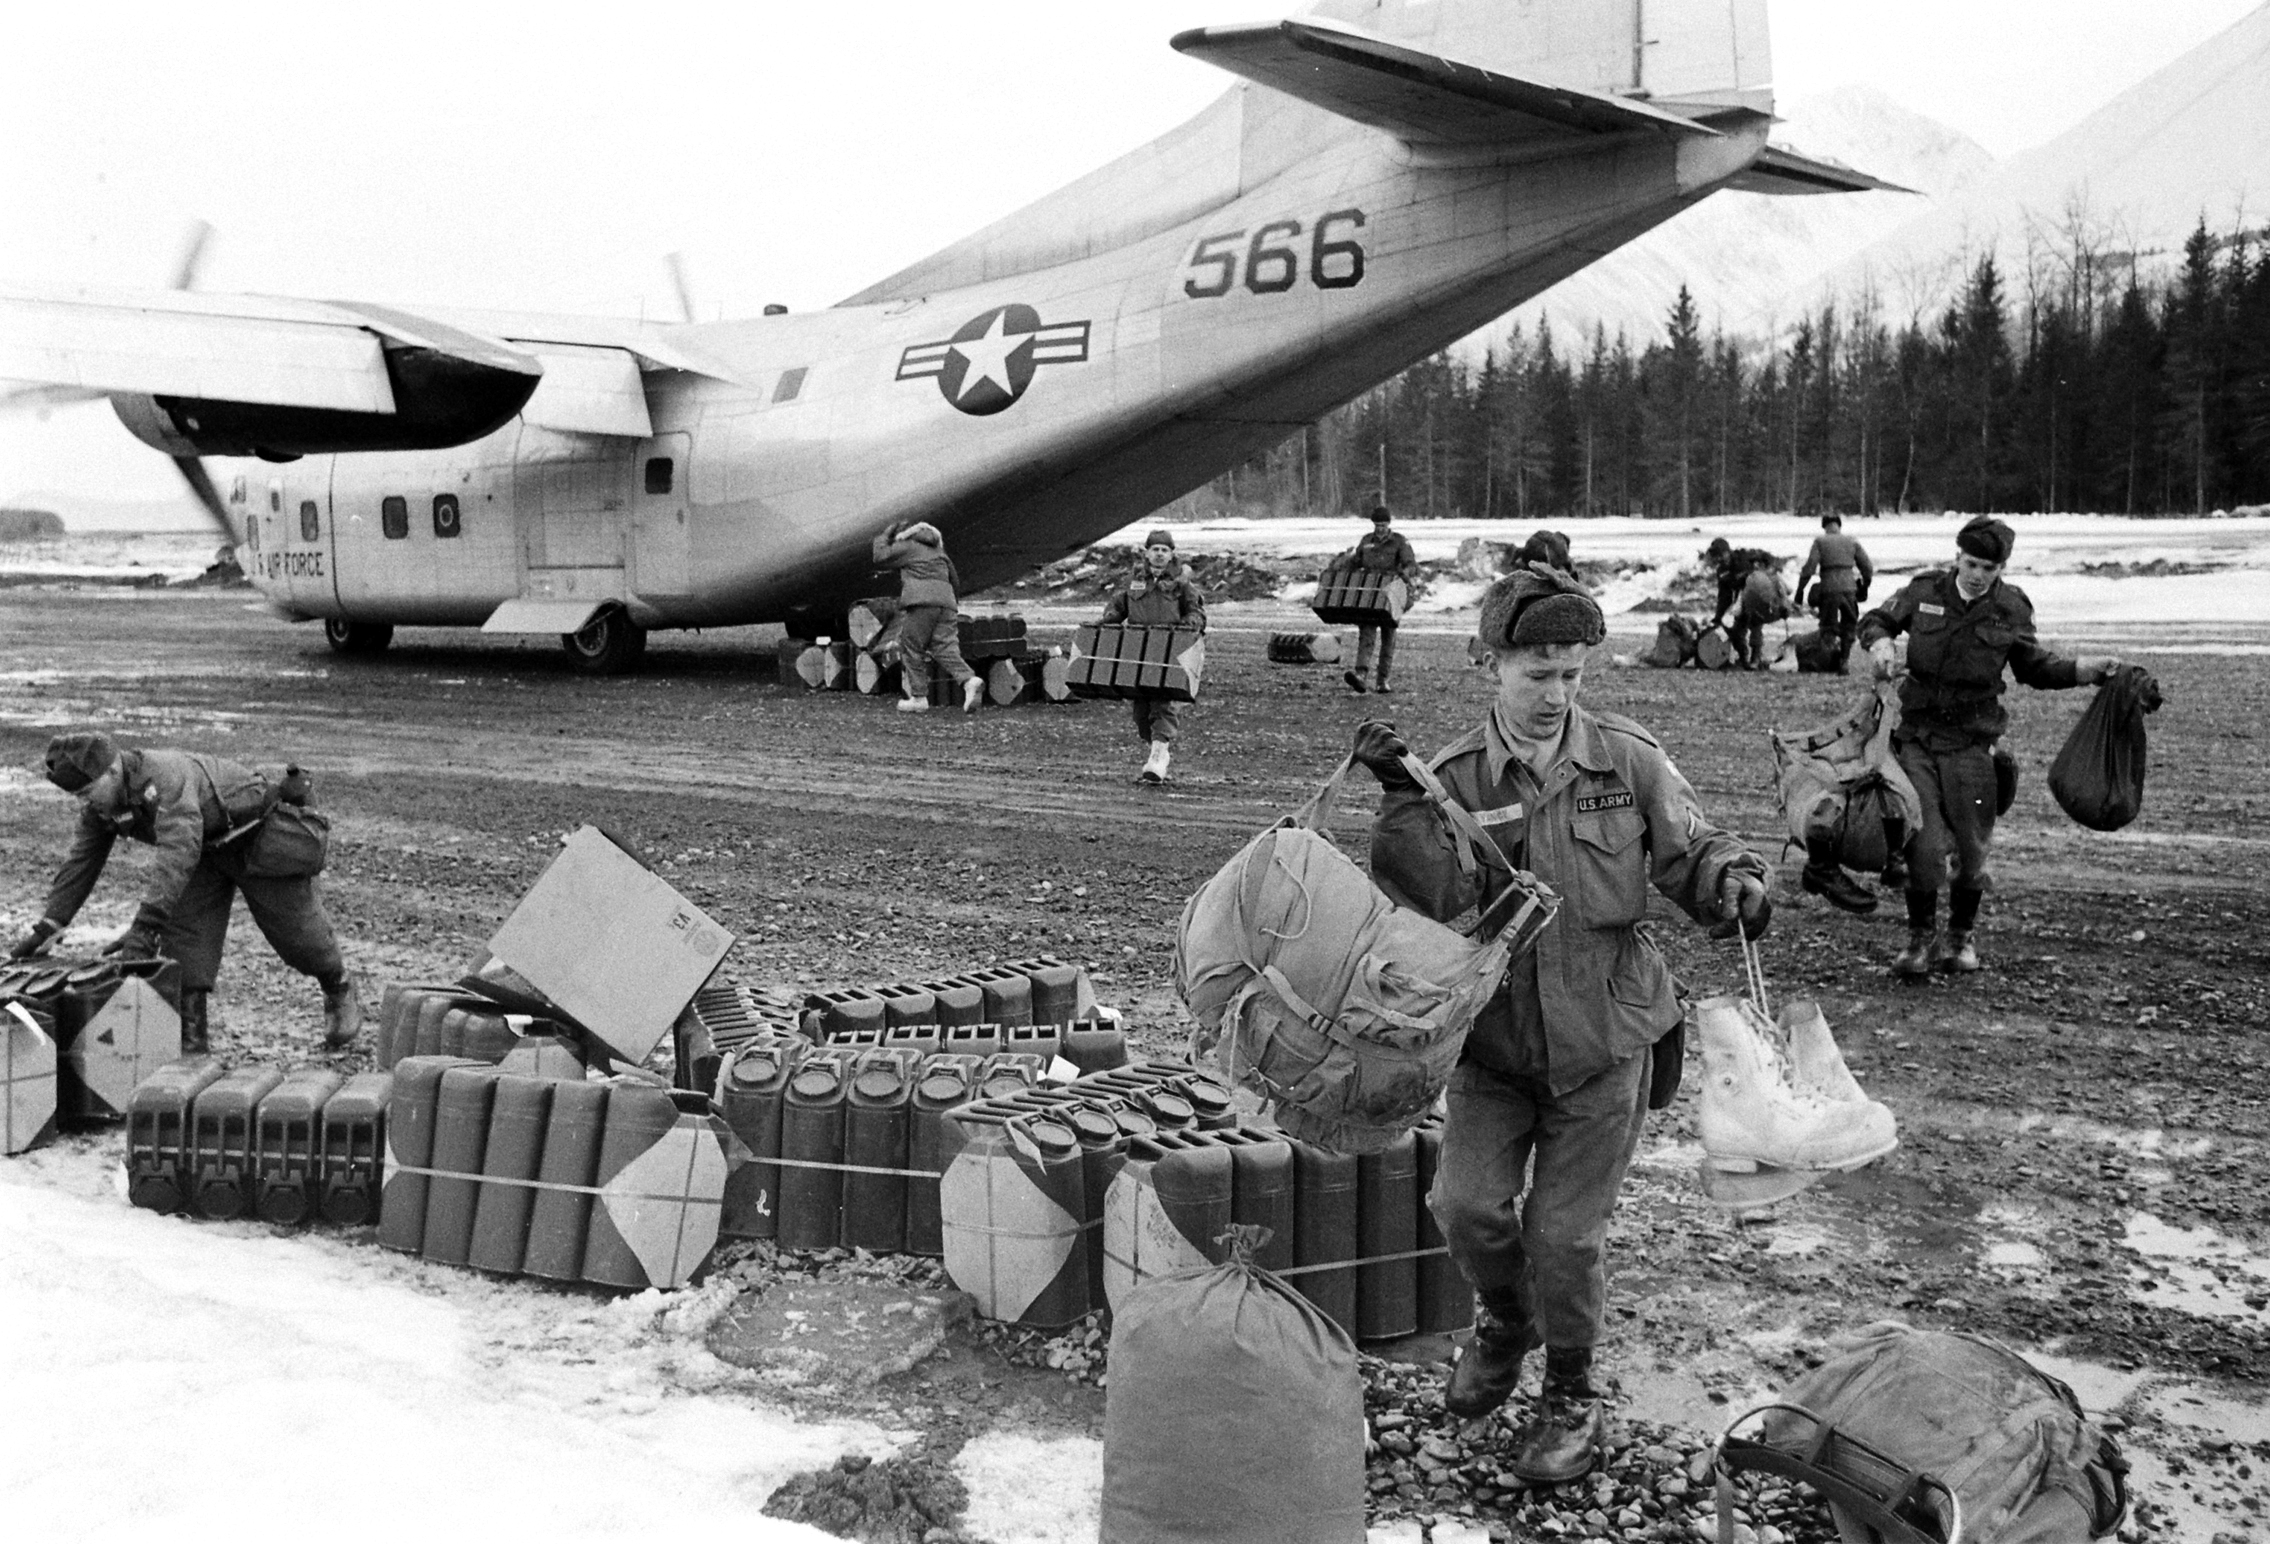 Unloading relief supplies after the March 1964 Good Friday Earthquake, Alaska.